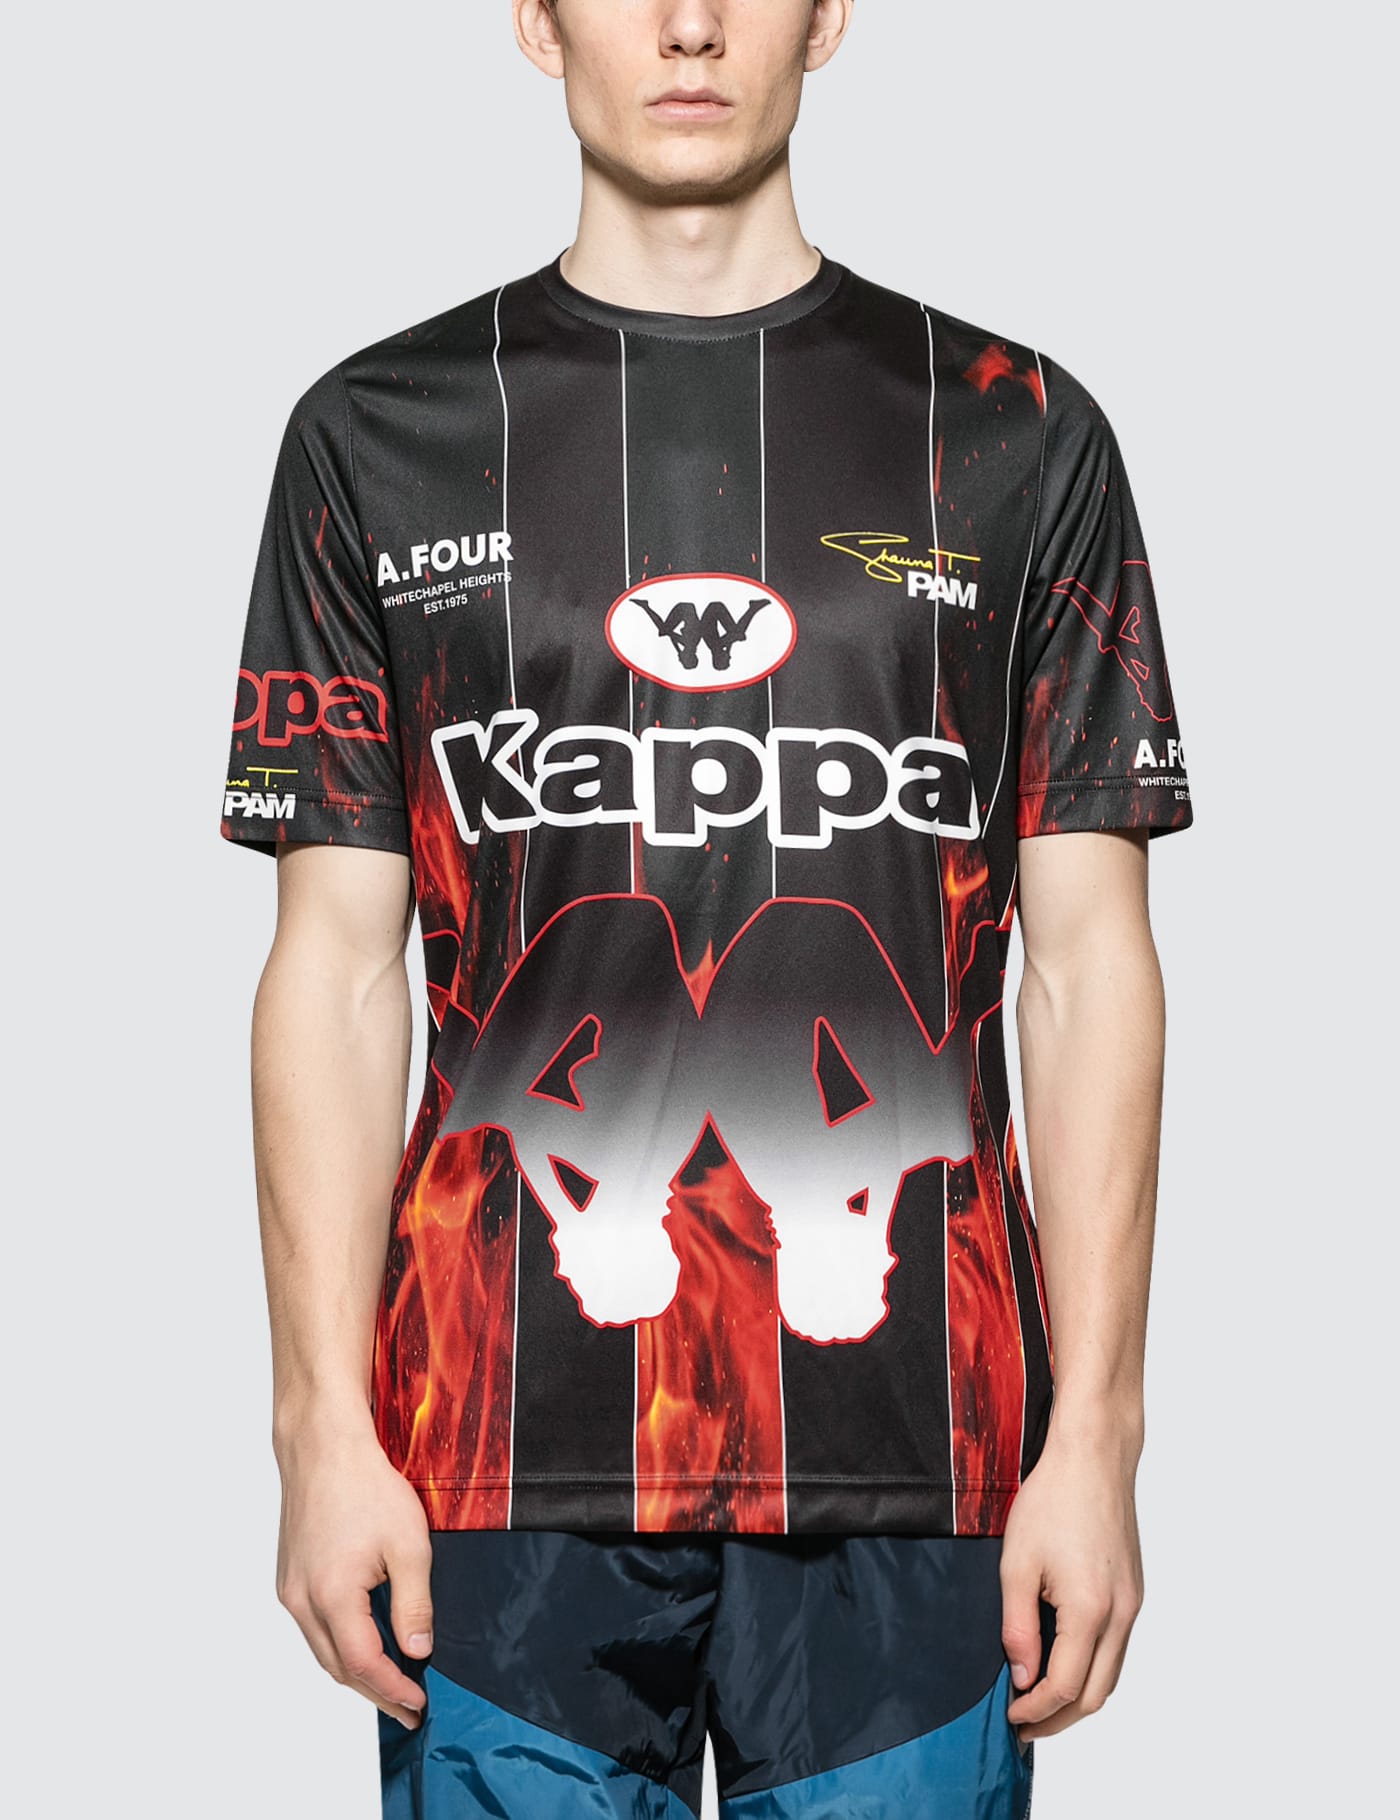 Perks and Mini - P.A.M. x A.Four Labs x Kappa Sublimation Football